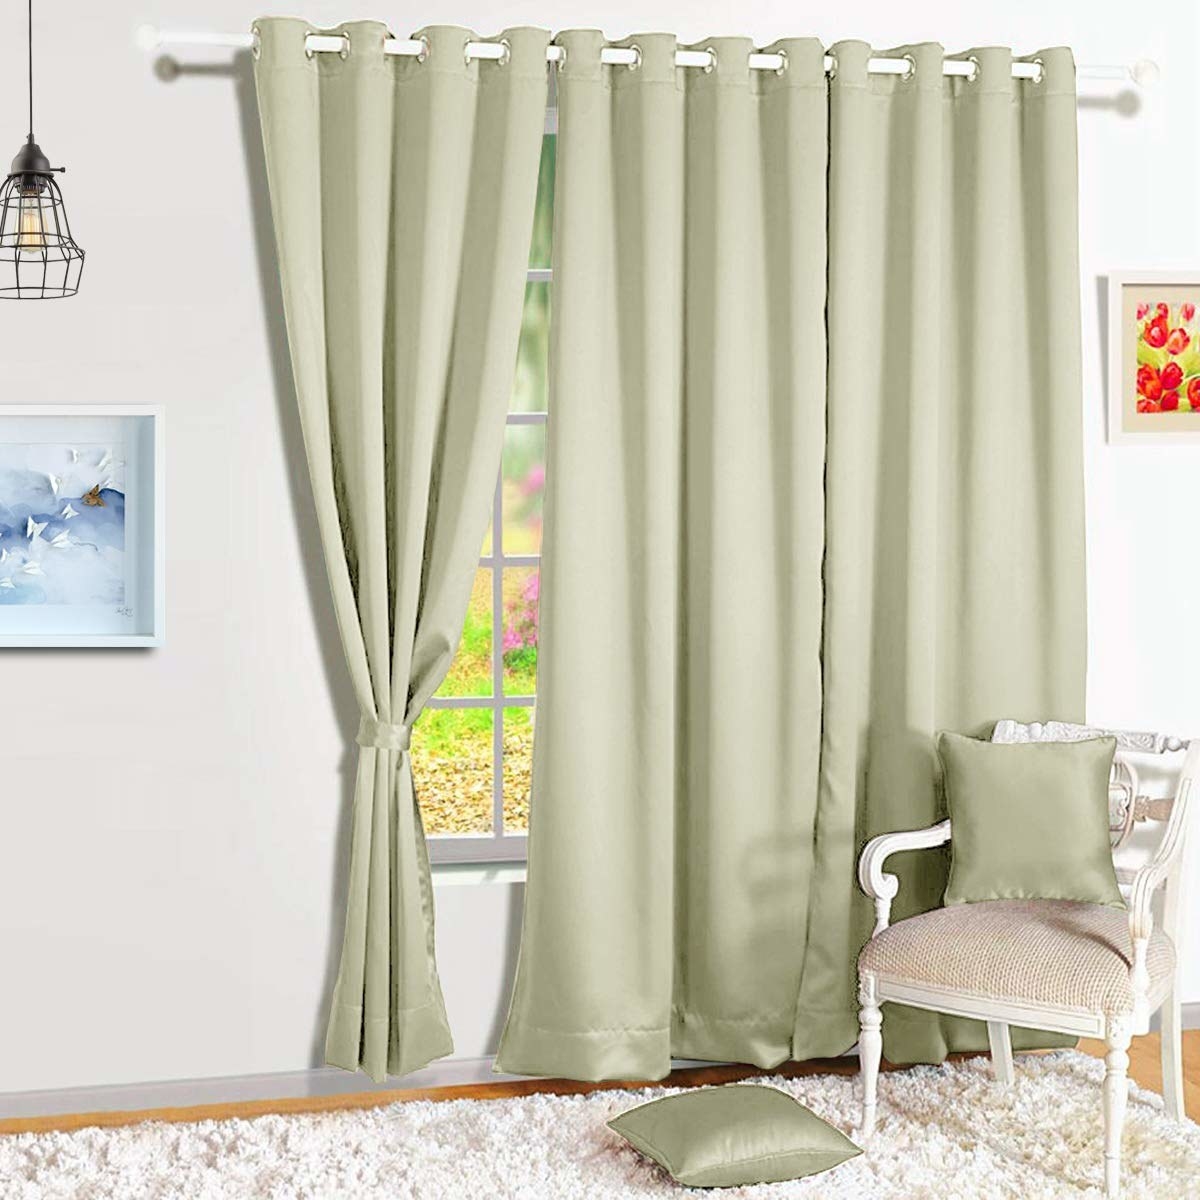 Cream-coloured blackout curtains in a room with rug and chair